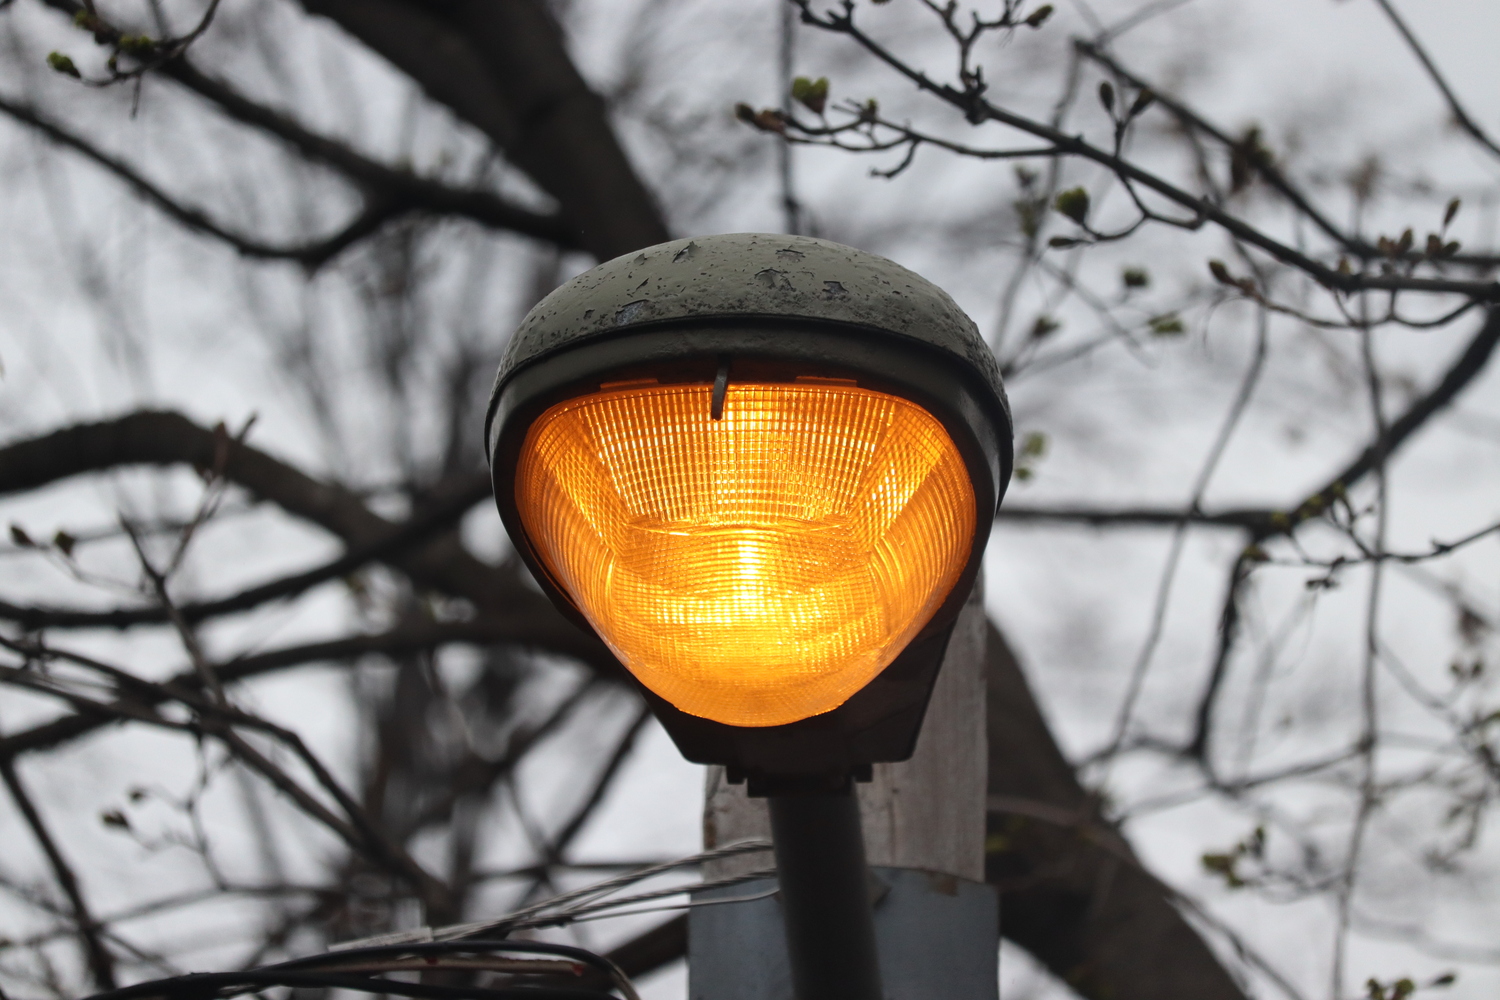 a glowing amber street lamp
affixed to a telephone pole.
across its round top
there is peeling grey-brown paint.
the lamp is surrounded
by out of focus bare tree branches.